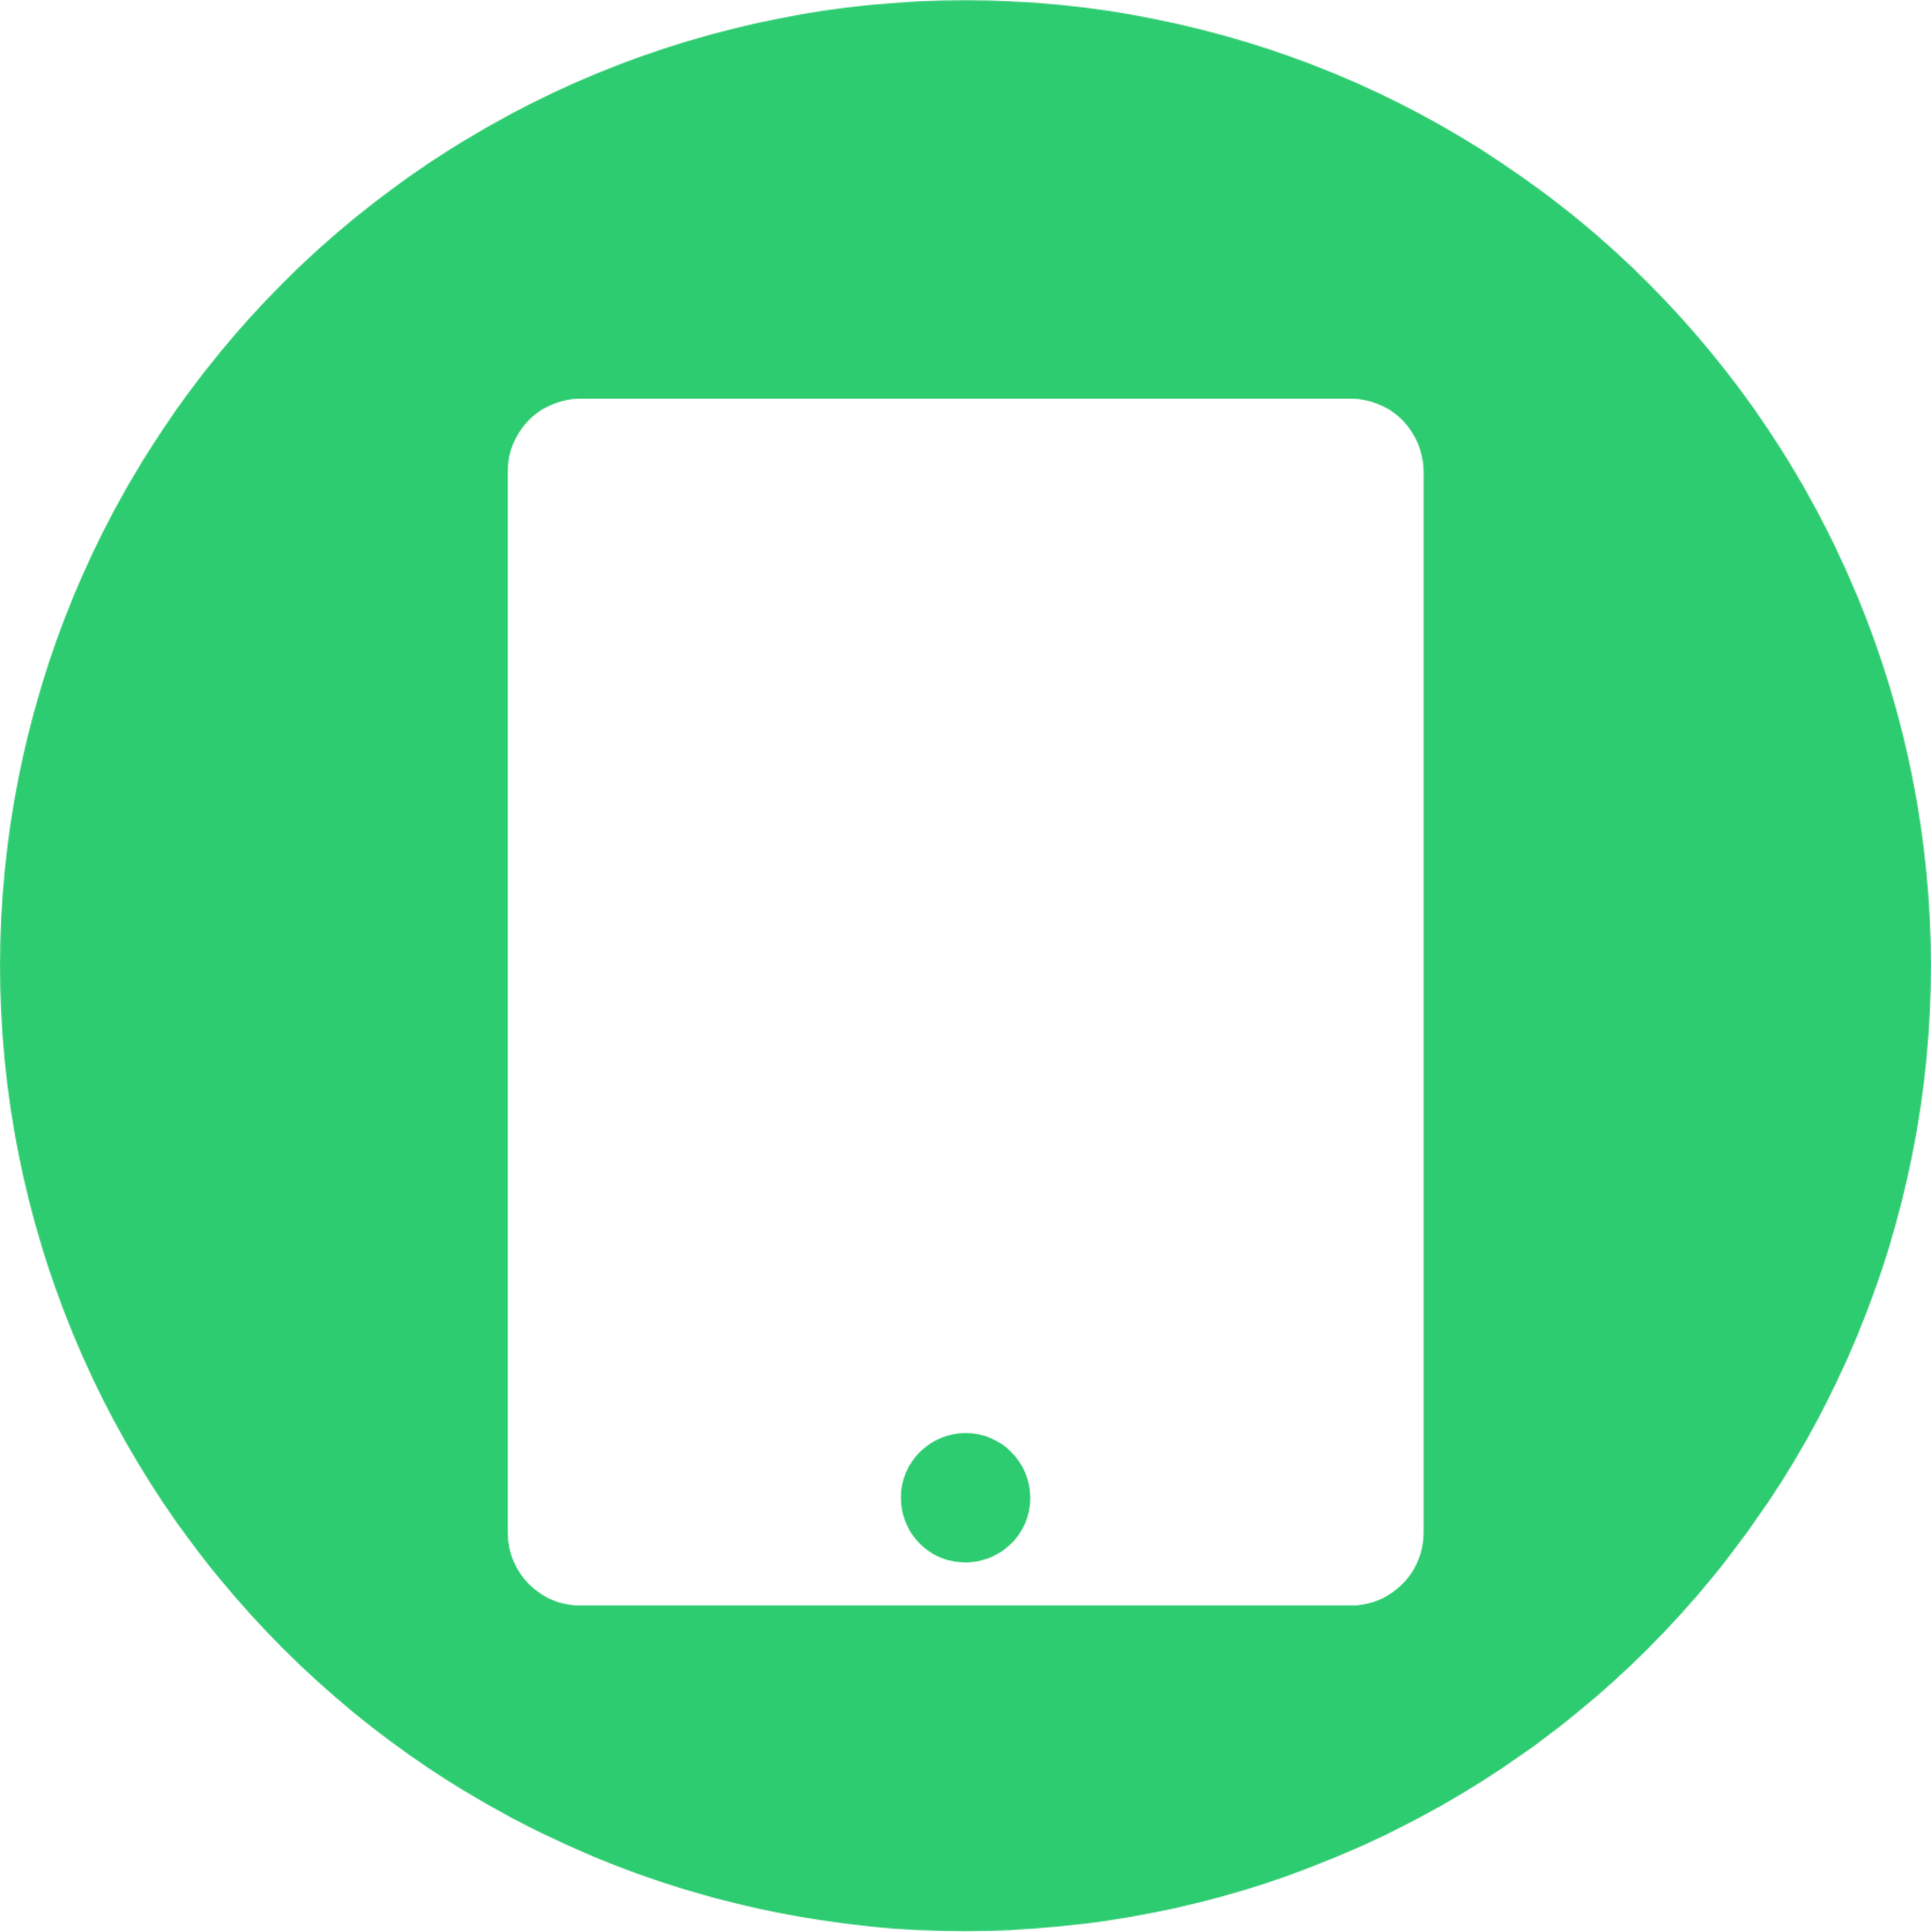 tablet connected icon